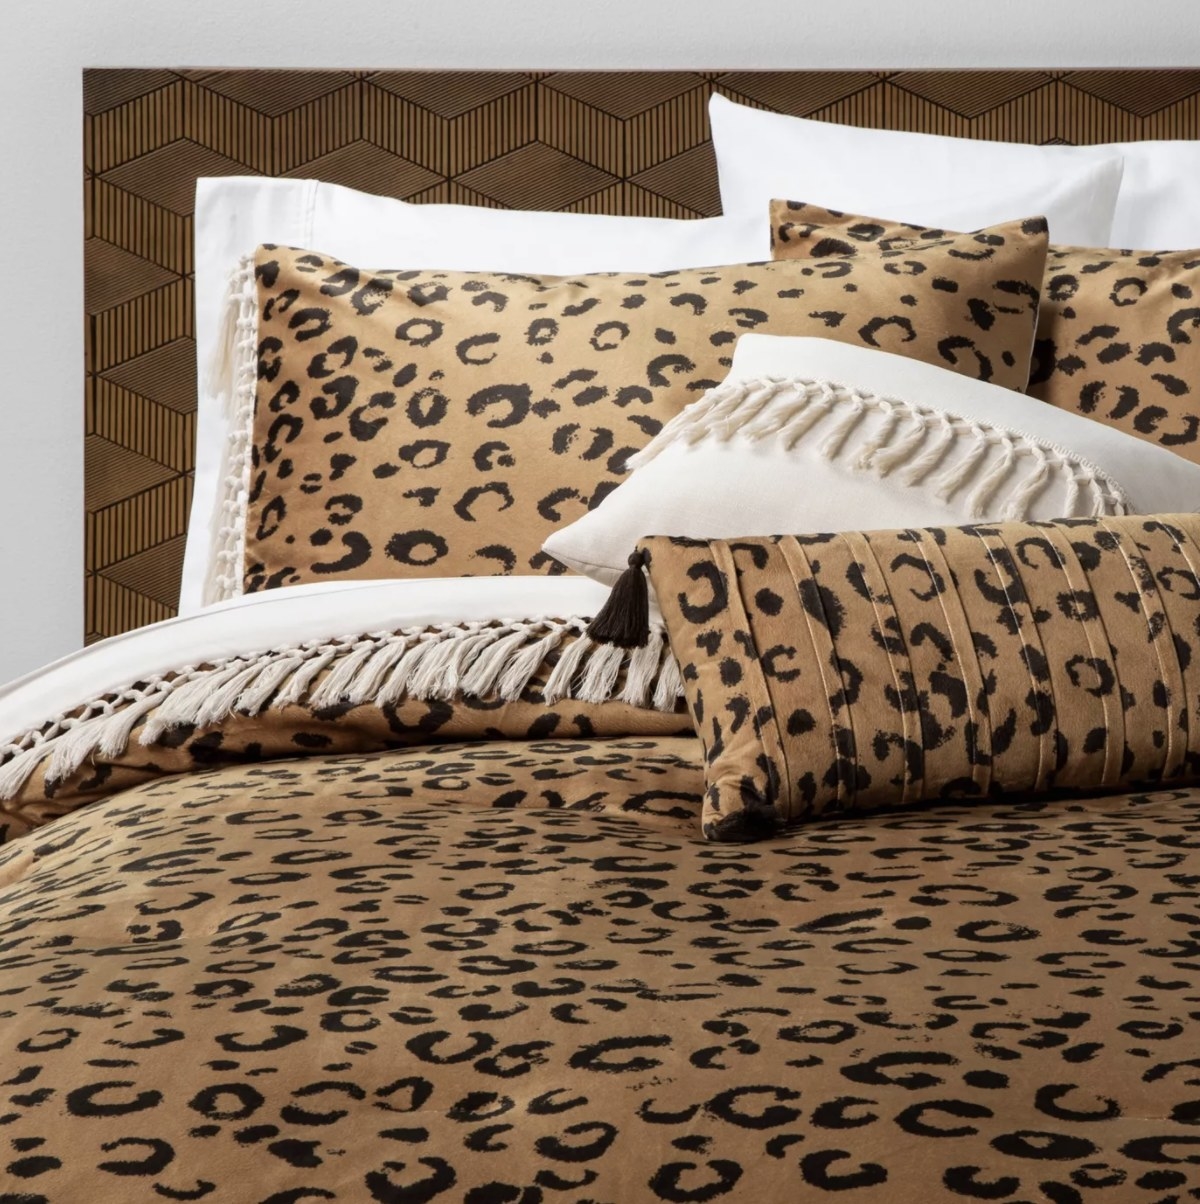 The animal print bed set is has light fringe, a gold base and black markings